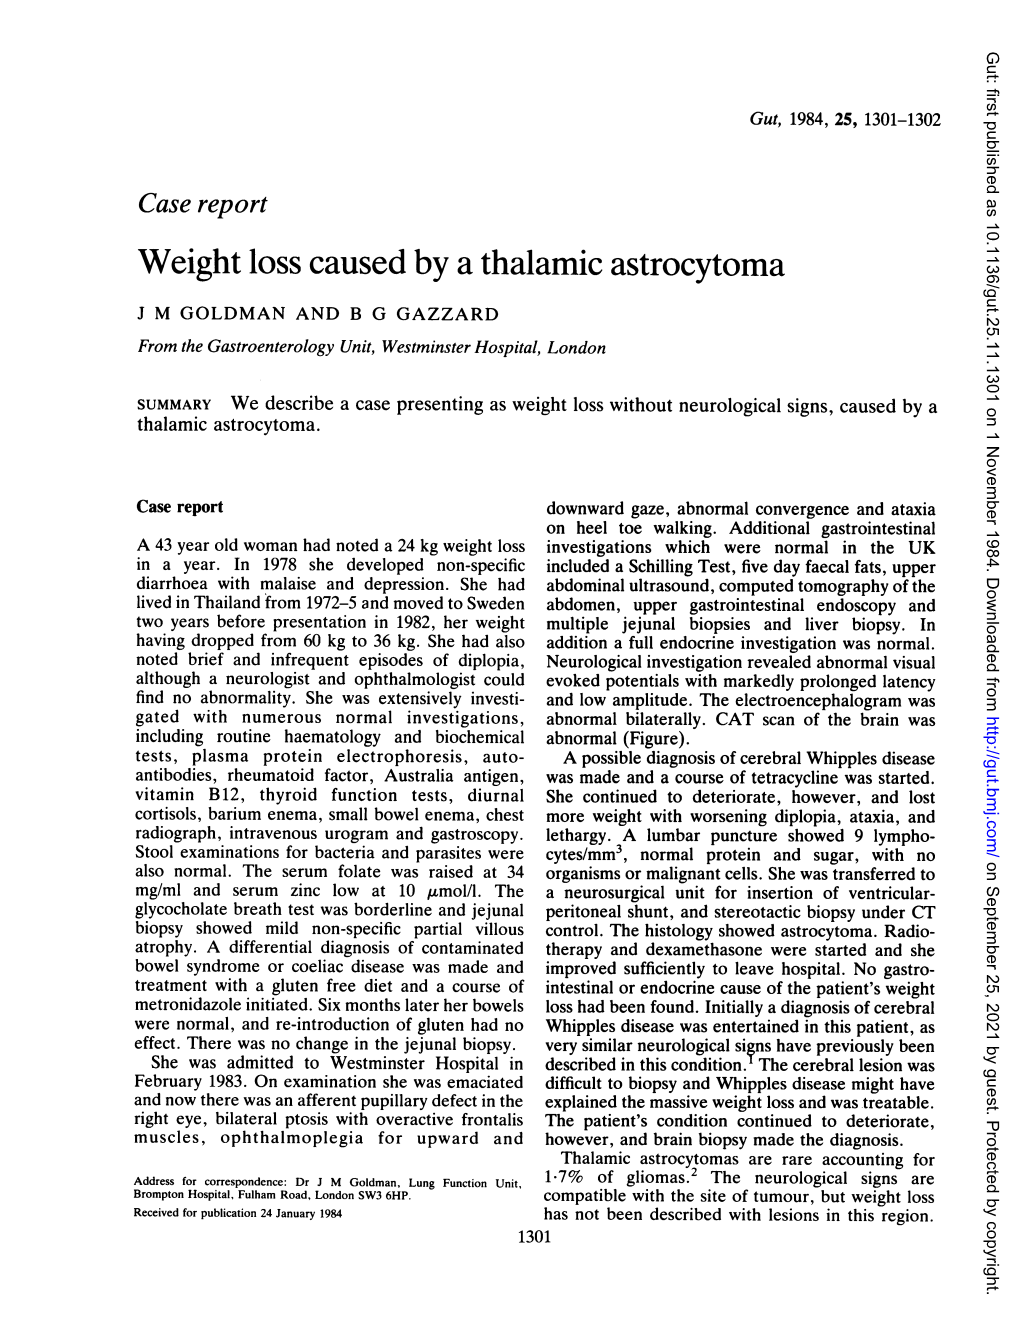 Weight Loss Caused by a Thalamic Astrocytoma J M GOLDMAN and B G GAZZARD from the Gastroenterology Unit, Westminster Hospital, London